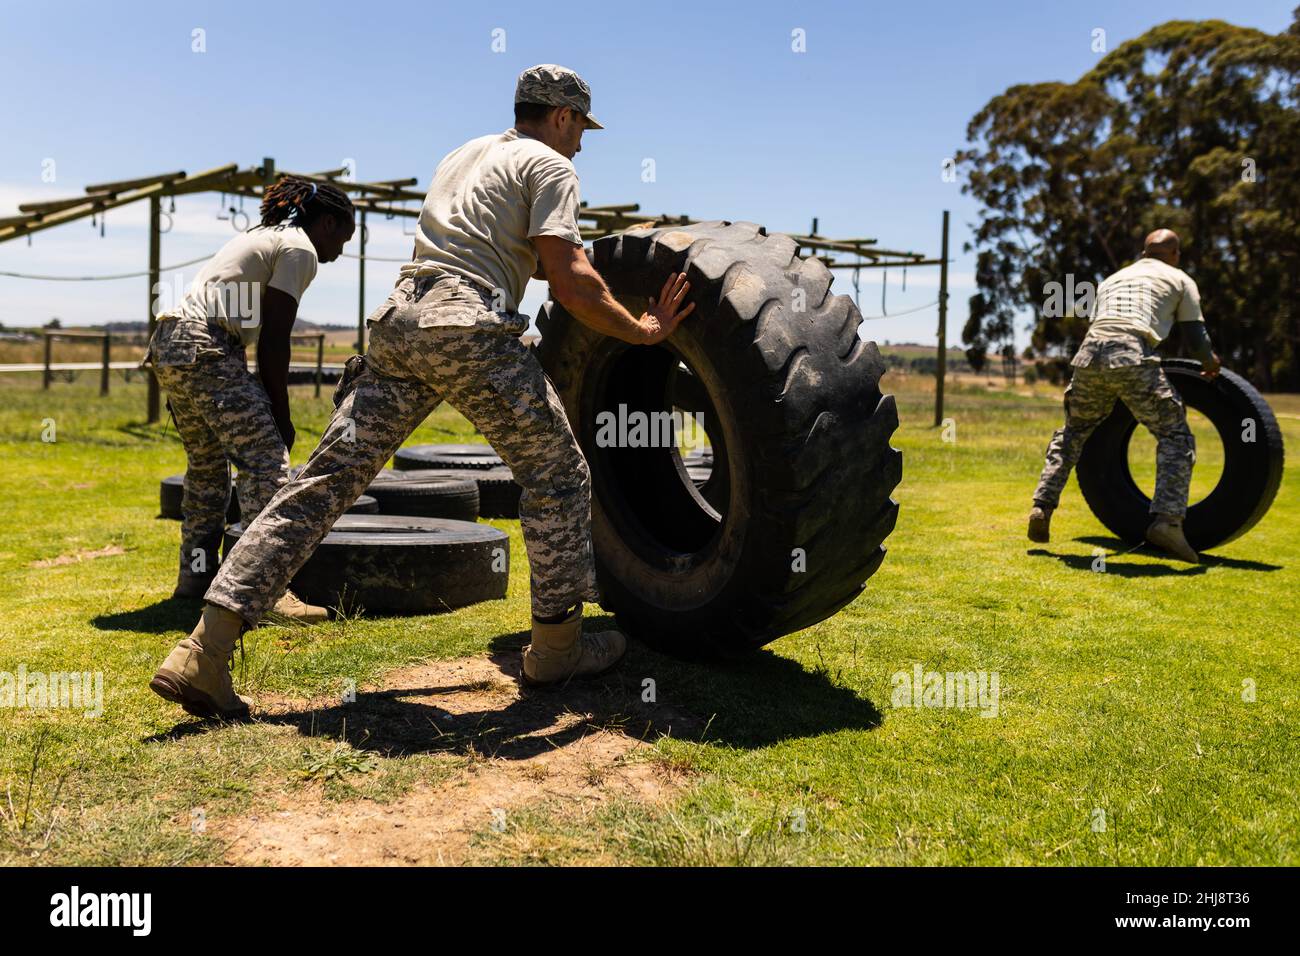 Group of male and female diverse soldiers flipping tires during obstacle course at boot camp Stock Photo